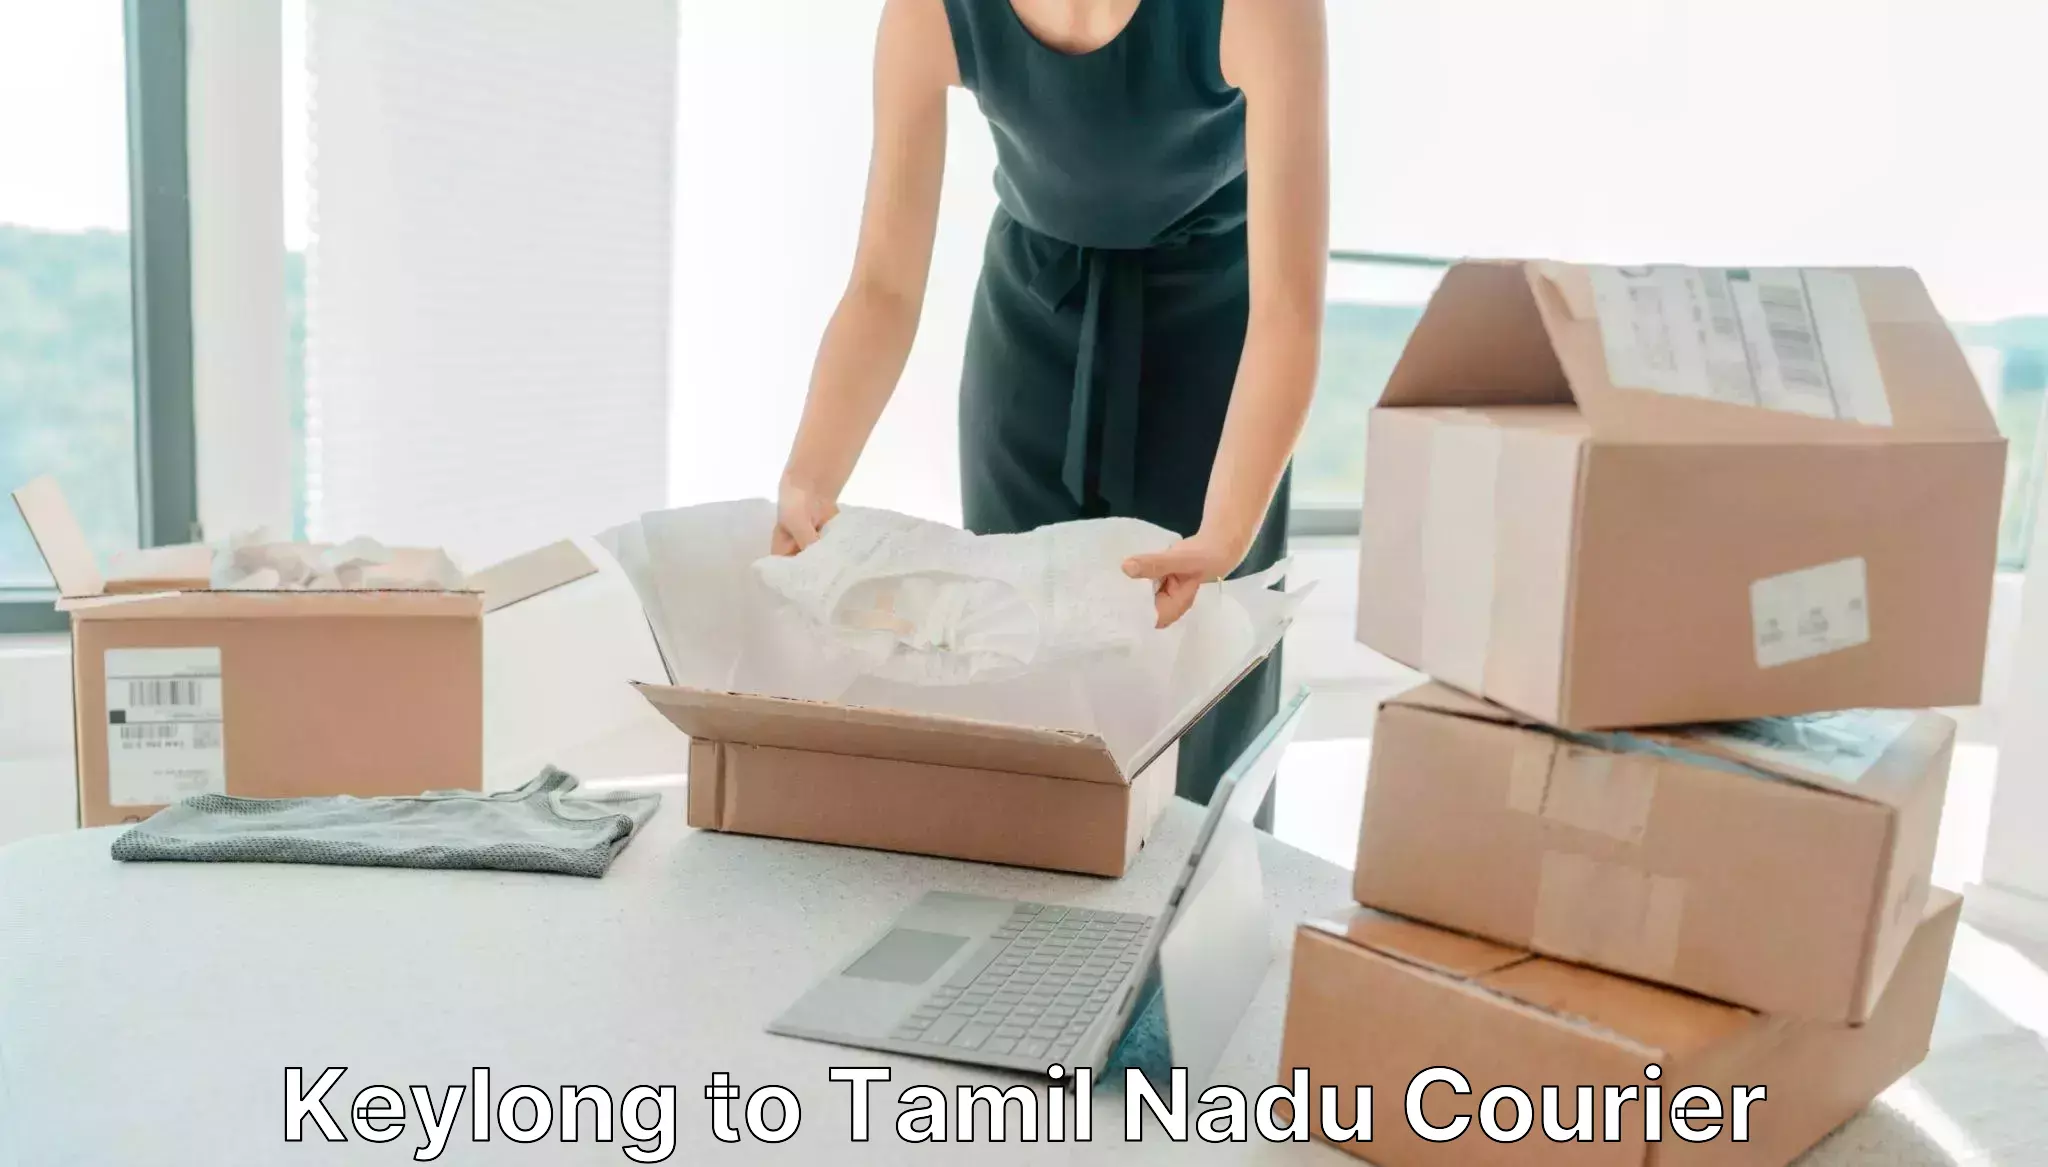 International courier networks Keylong to Ranipet